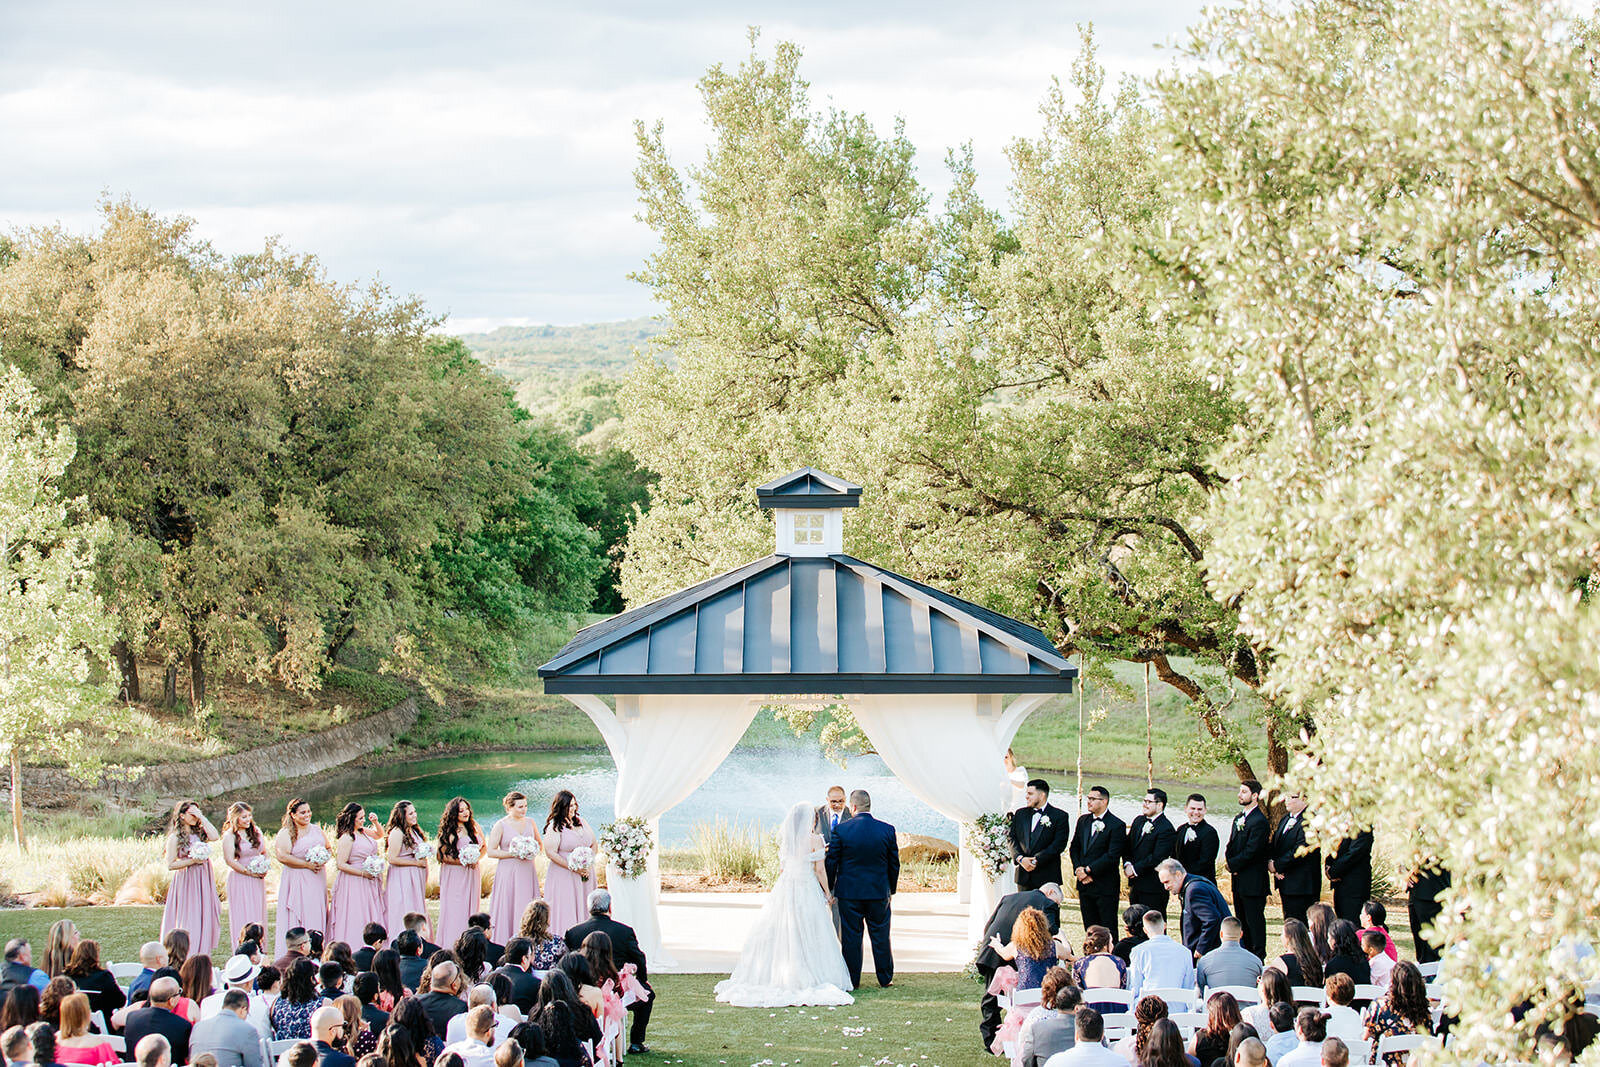 A kendall Point outdoor wedding held just beside the lake.